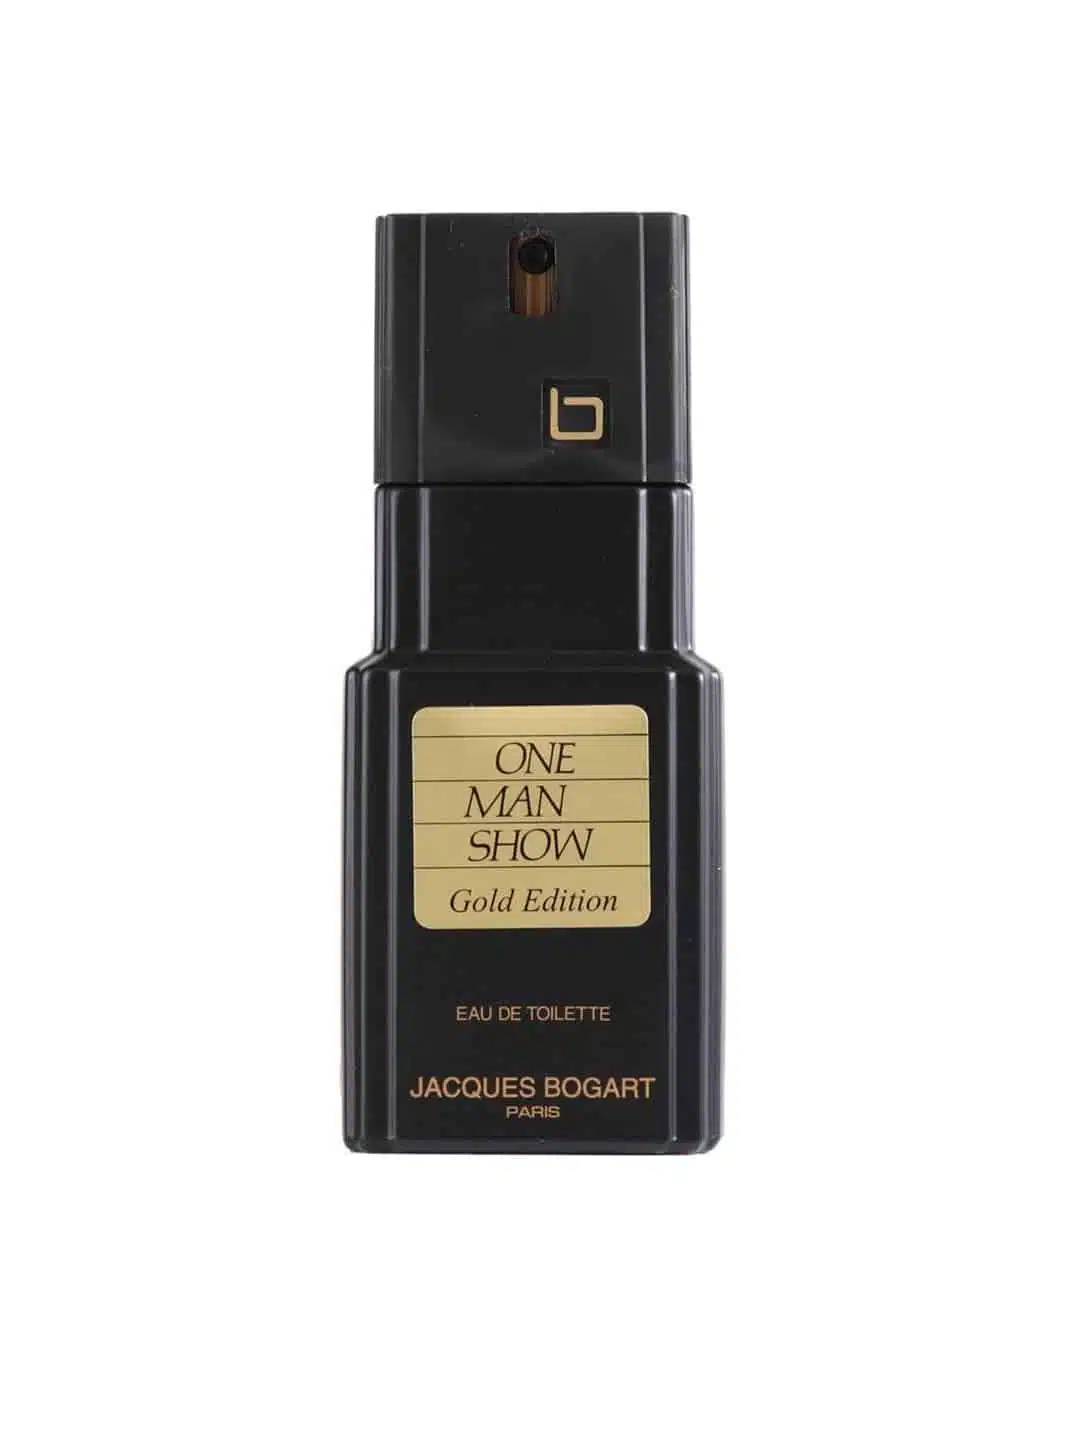 Jacques Bogart One Man Show Gold Edition EDT Perfume For Men 100 ml